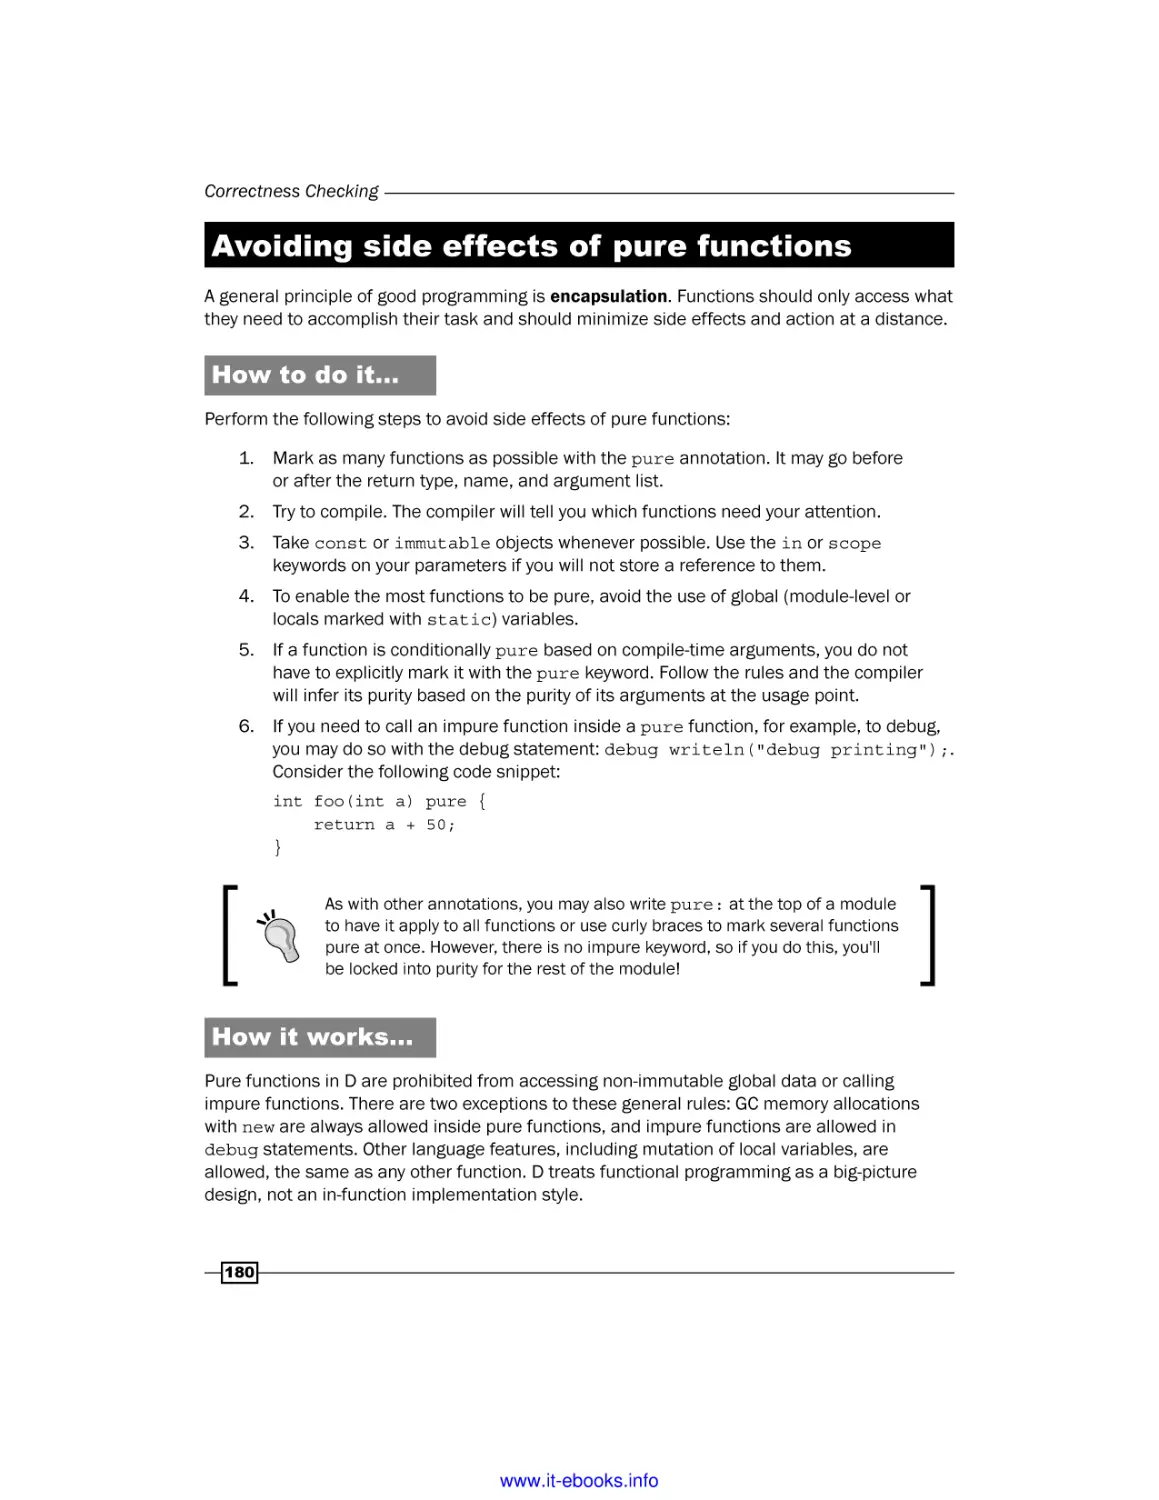 Avoiding side effects of pure functions